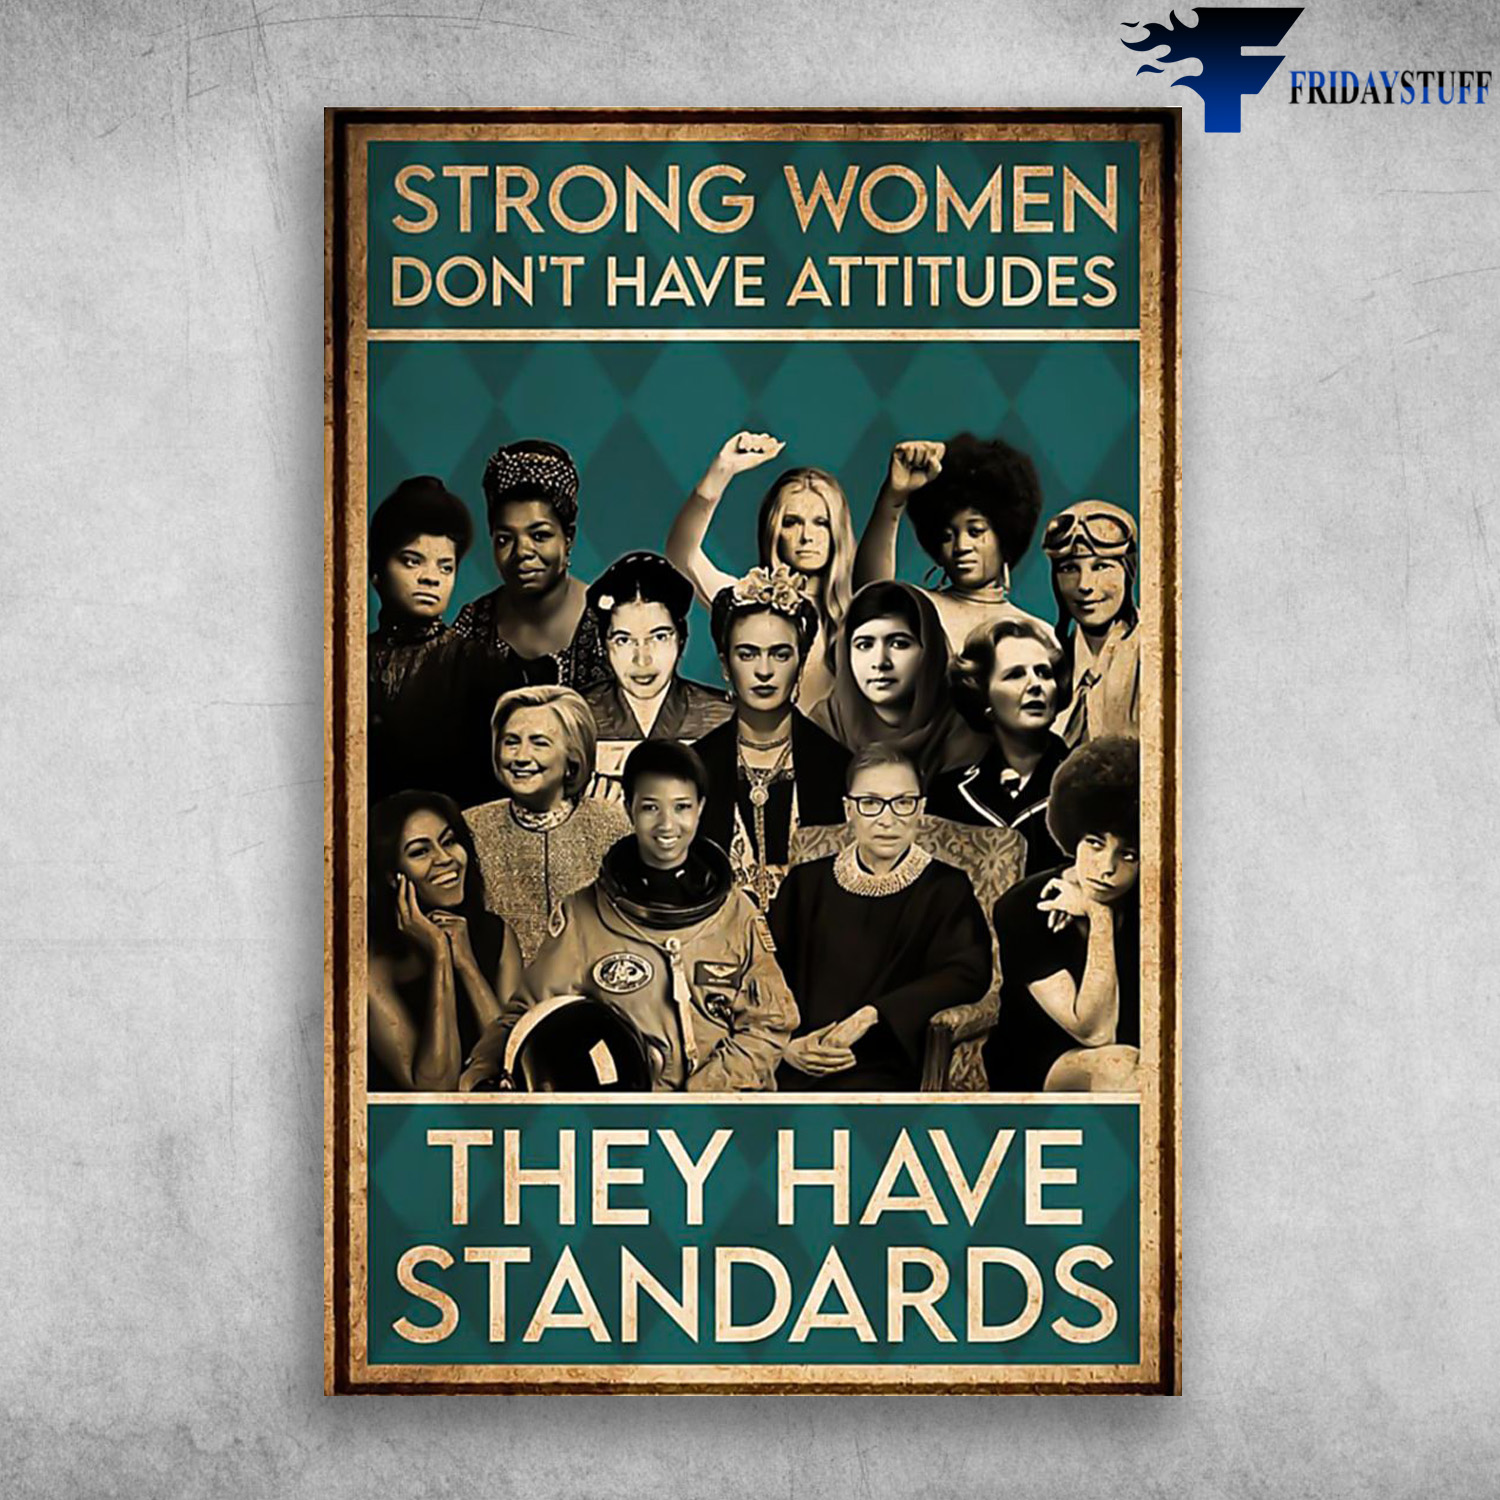 Strong Women - Don't Have Attitudes, They Have Standards, Ida B. Wells, Ruth Bader Ginsburg, Frida Kahlo,Hillary Clinton